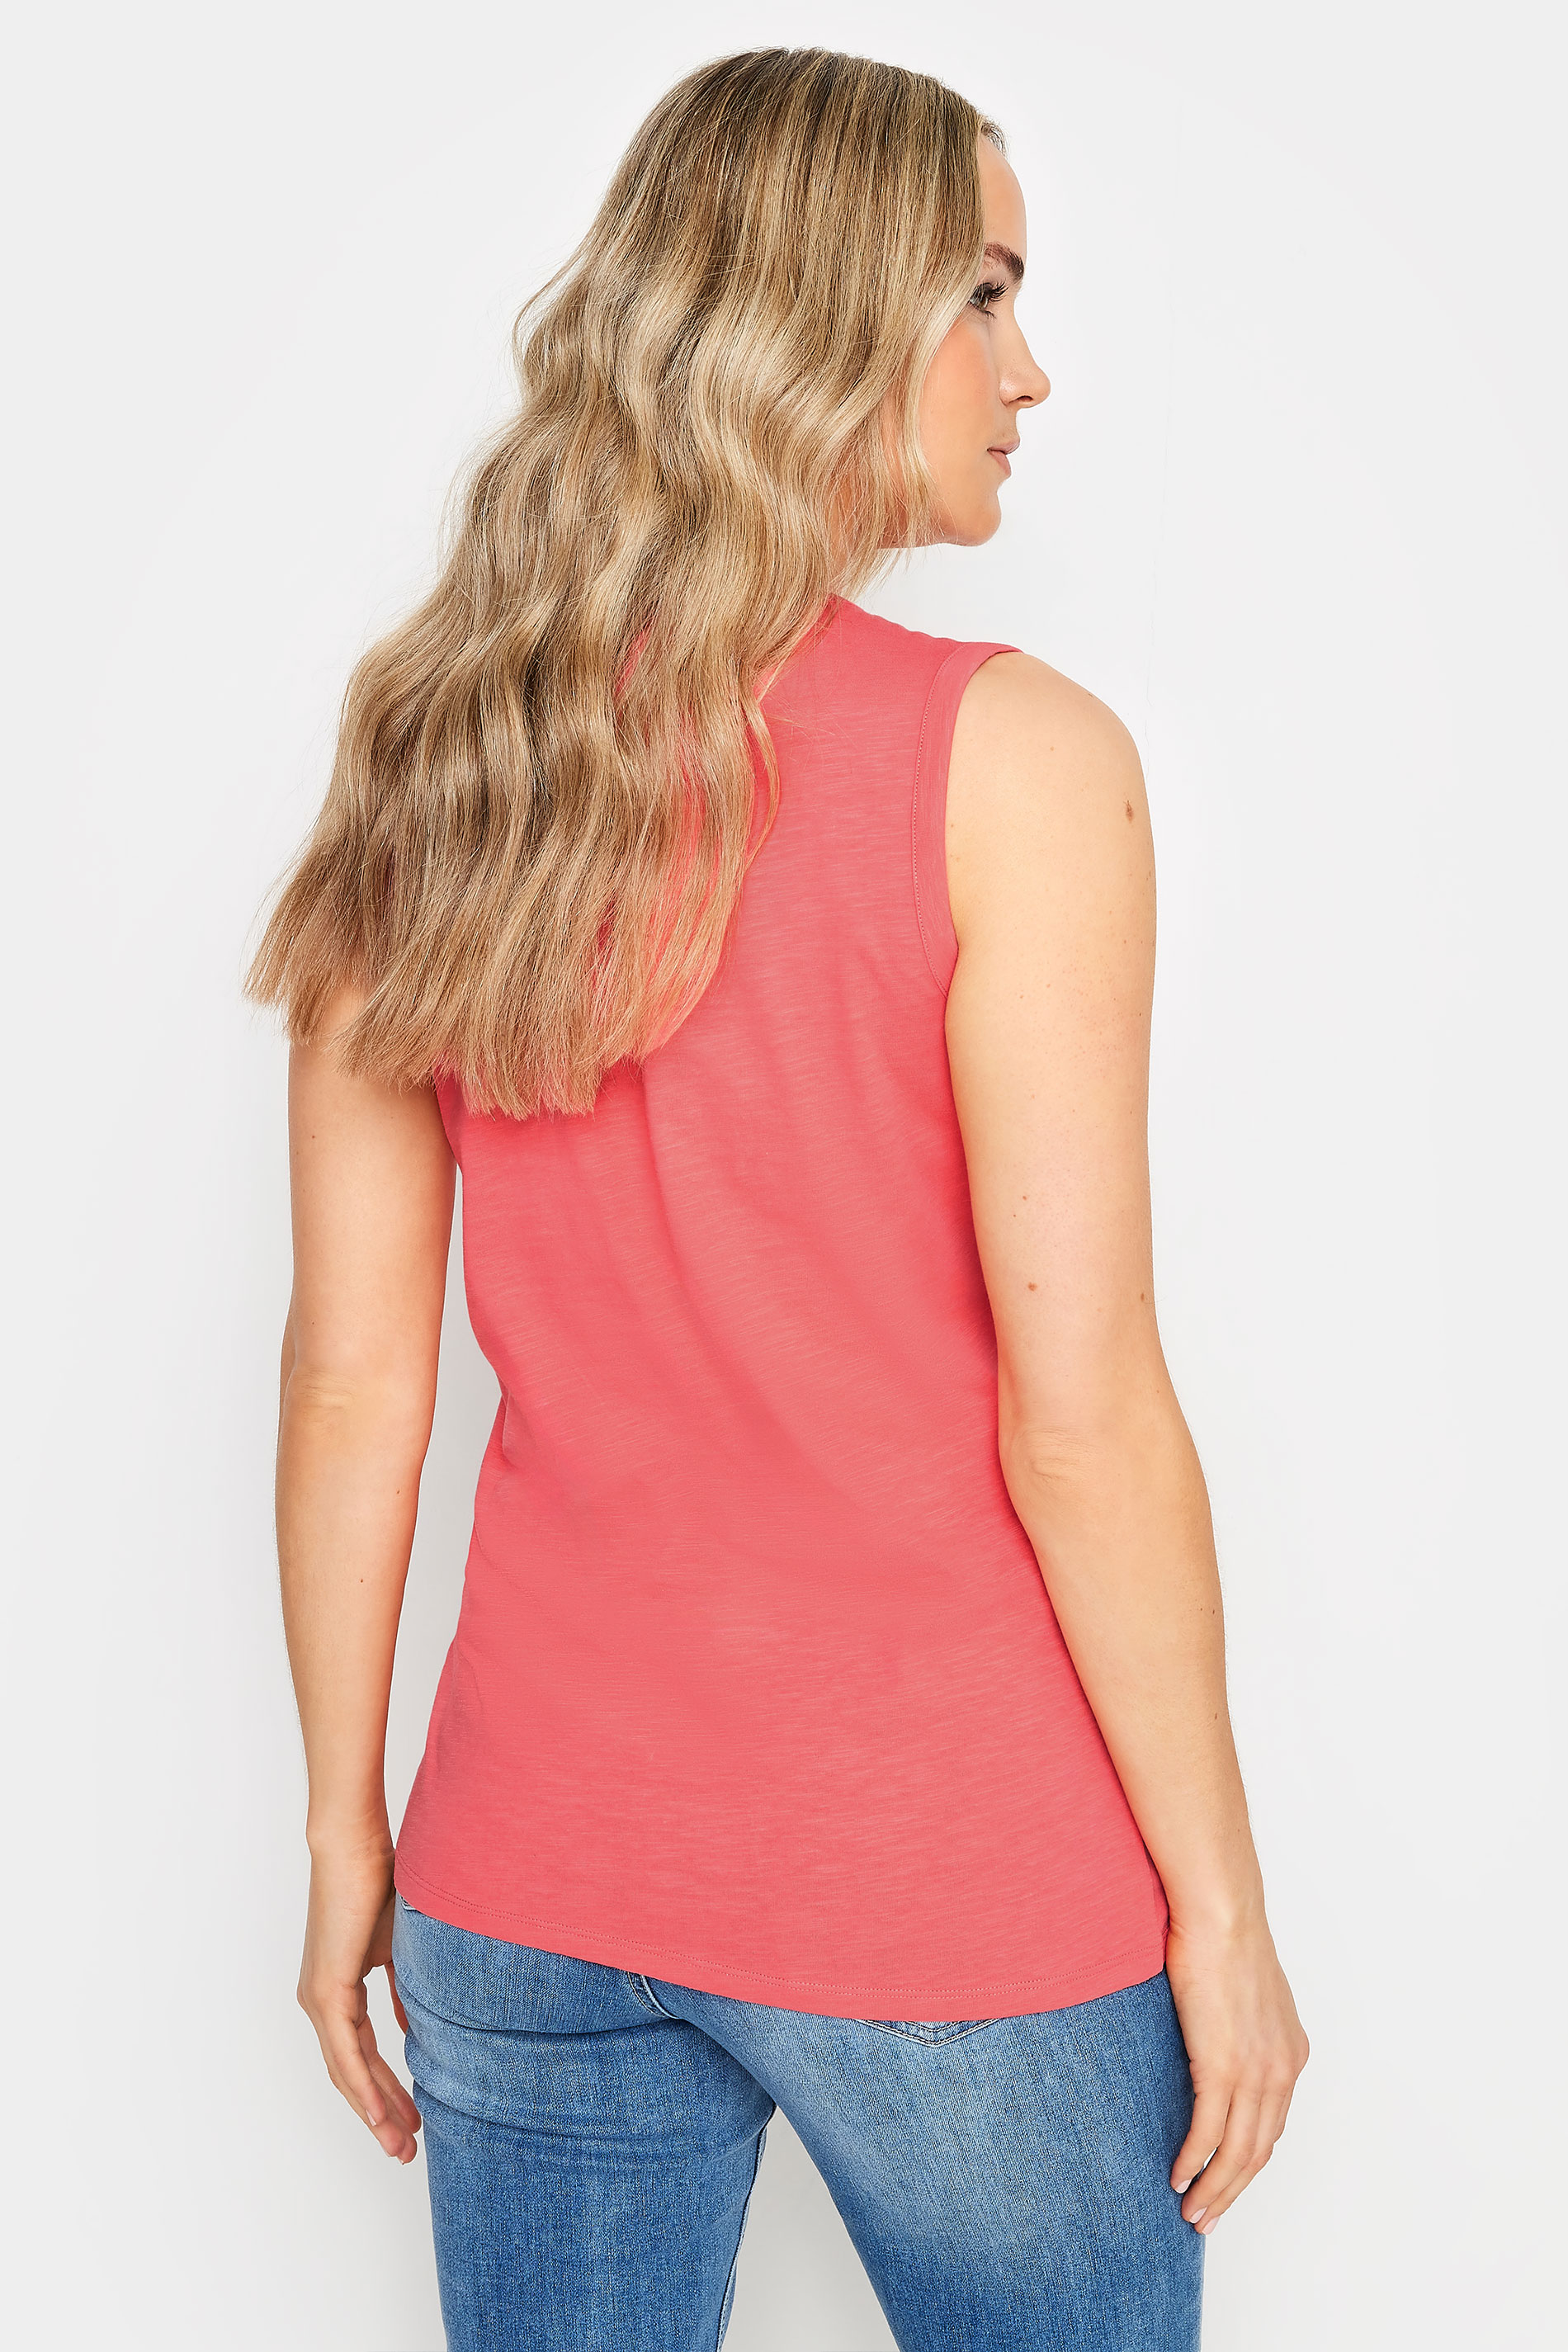 LTS Tall Women's Coral Pink Cotton Henley Vest Top | Long Tall Sally 3